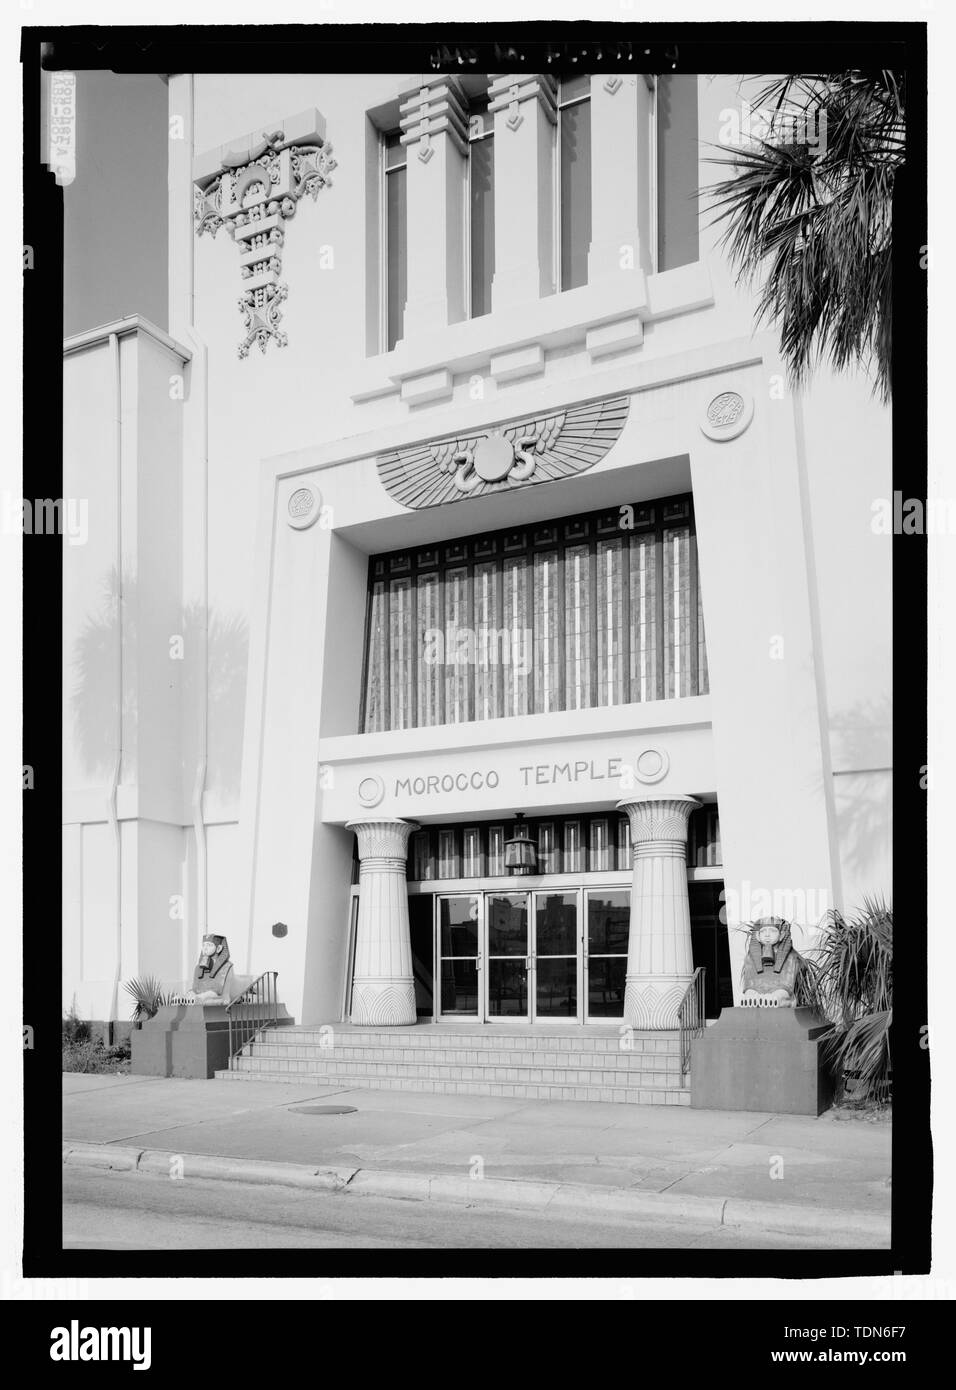 Perspective view of the entrance - Morocco Temple, 219 Newnan Street, Jacksonville, Duval County, FL Stock Photo